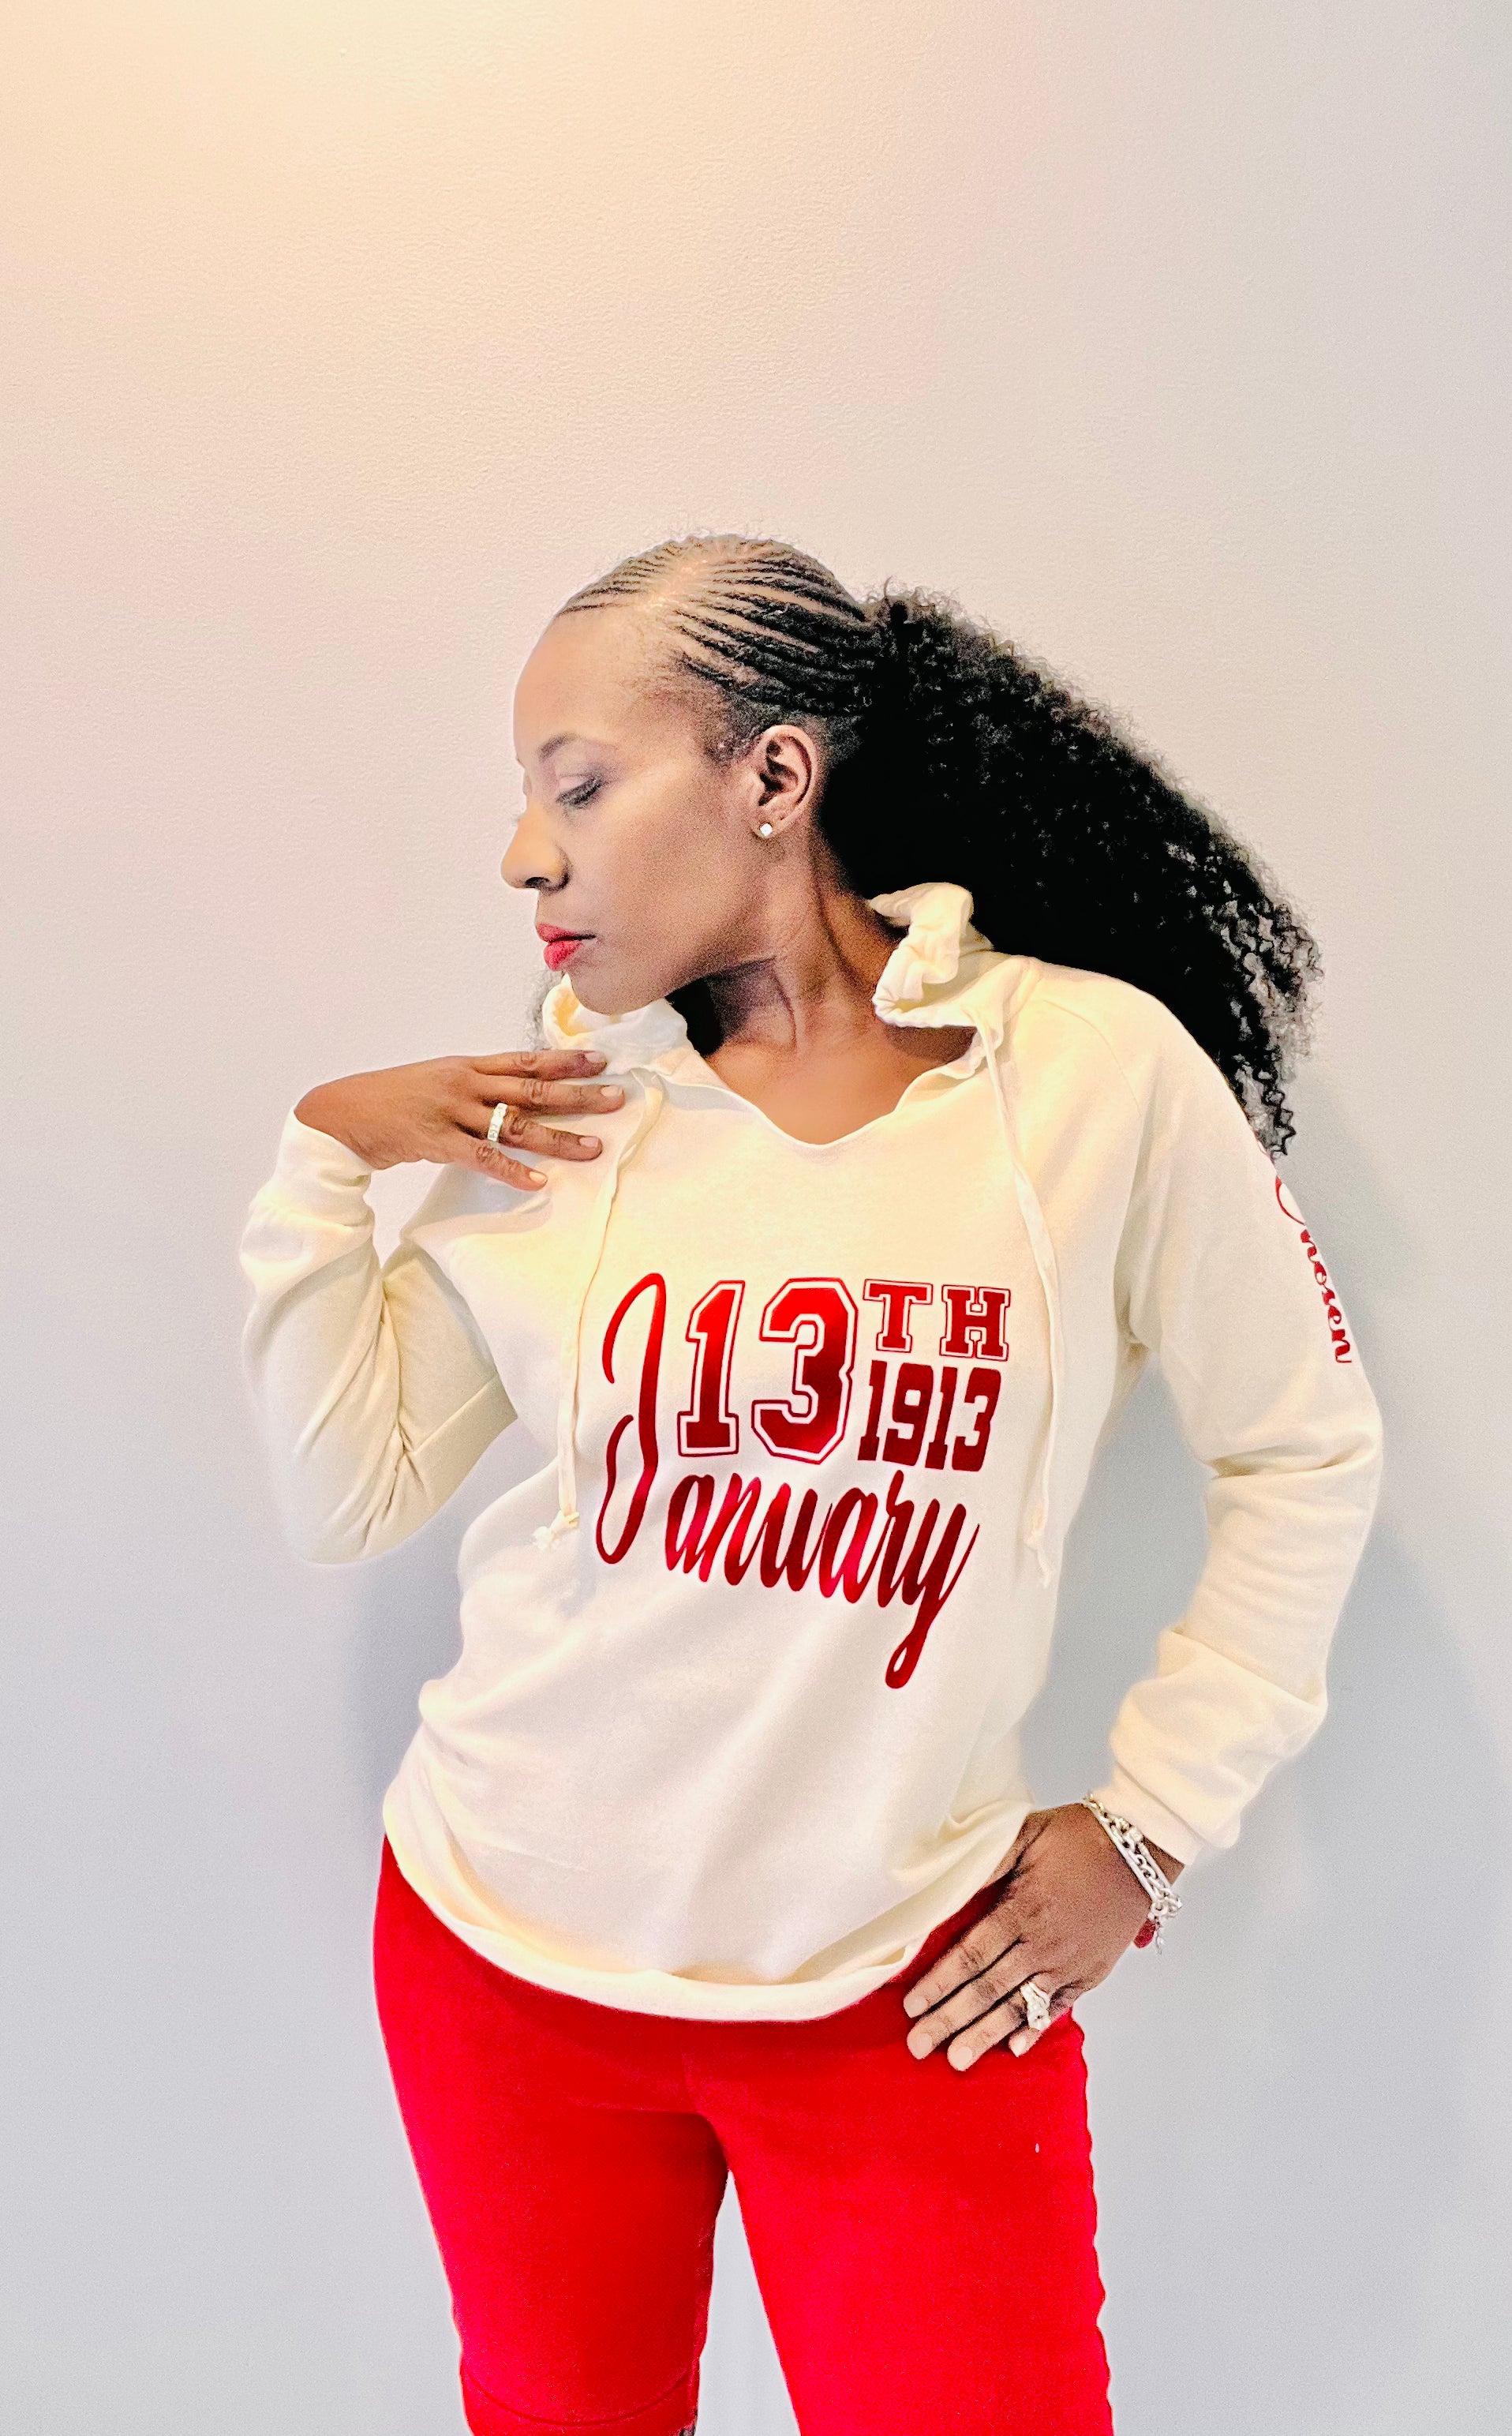  JIOEEH Aesthetic Hoodies Women Daily Hooded,cool things under 5  dollars,1 cent stuff,recent orders placed by me,sales today deals prime  under 10,sold and shipped items only : Clothing, Shoes & Jewelry